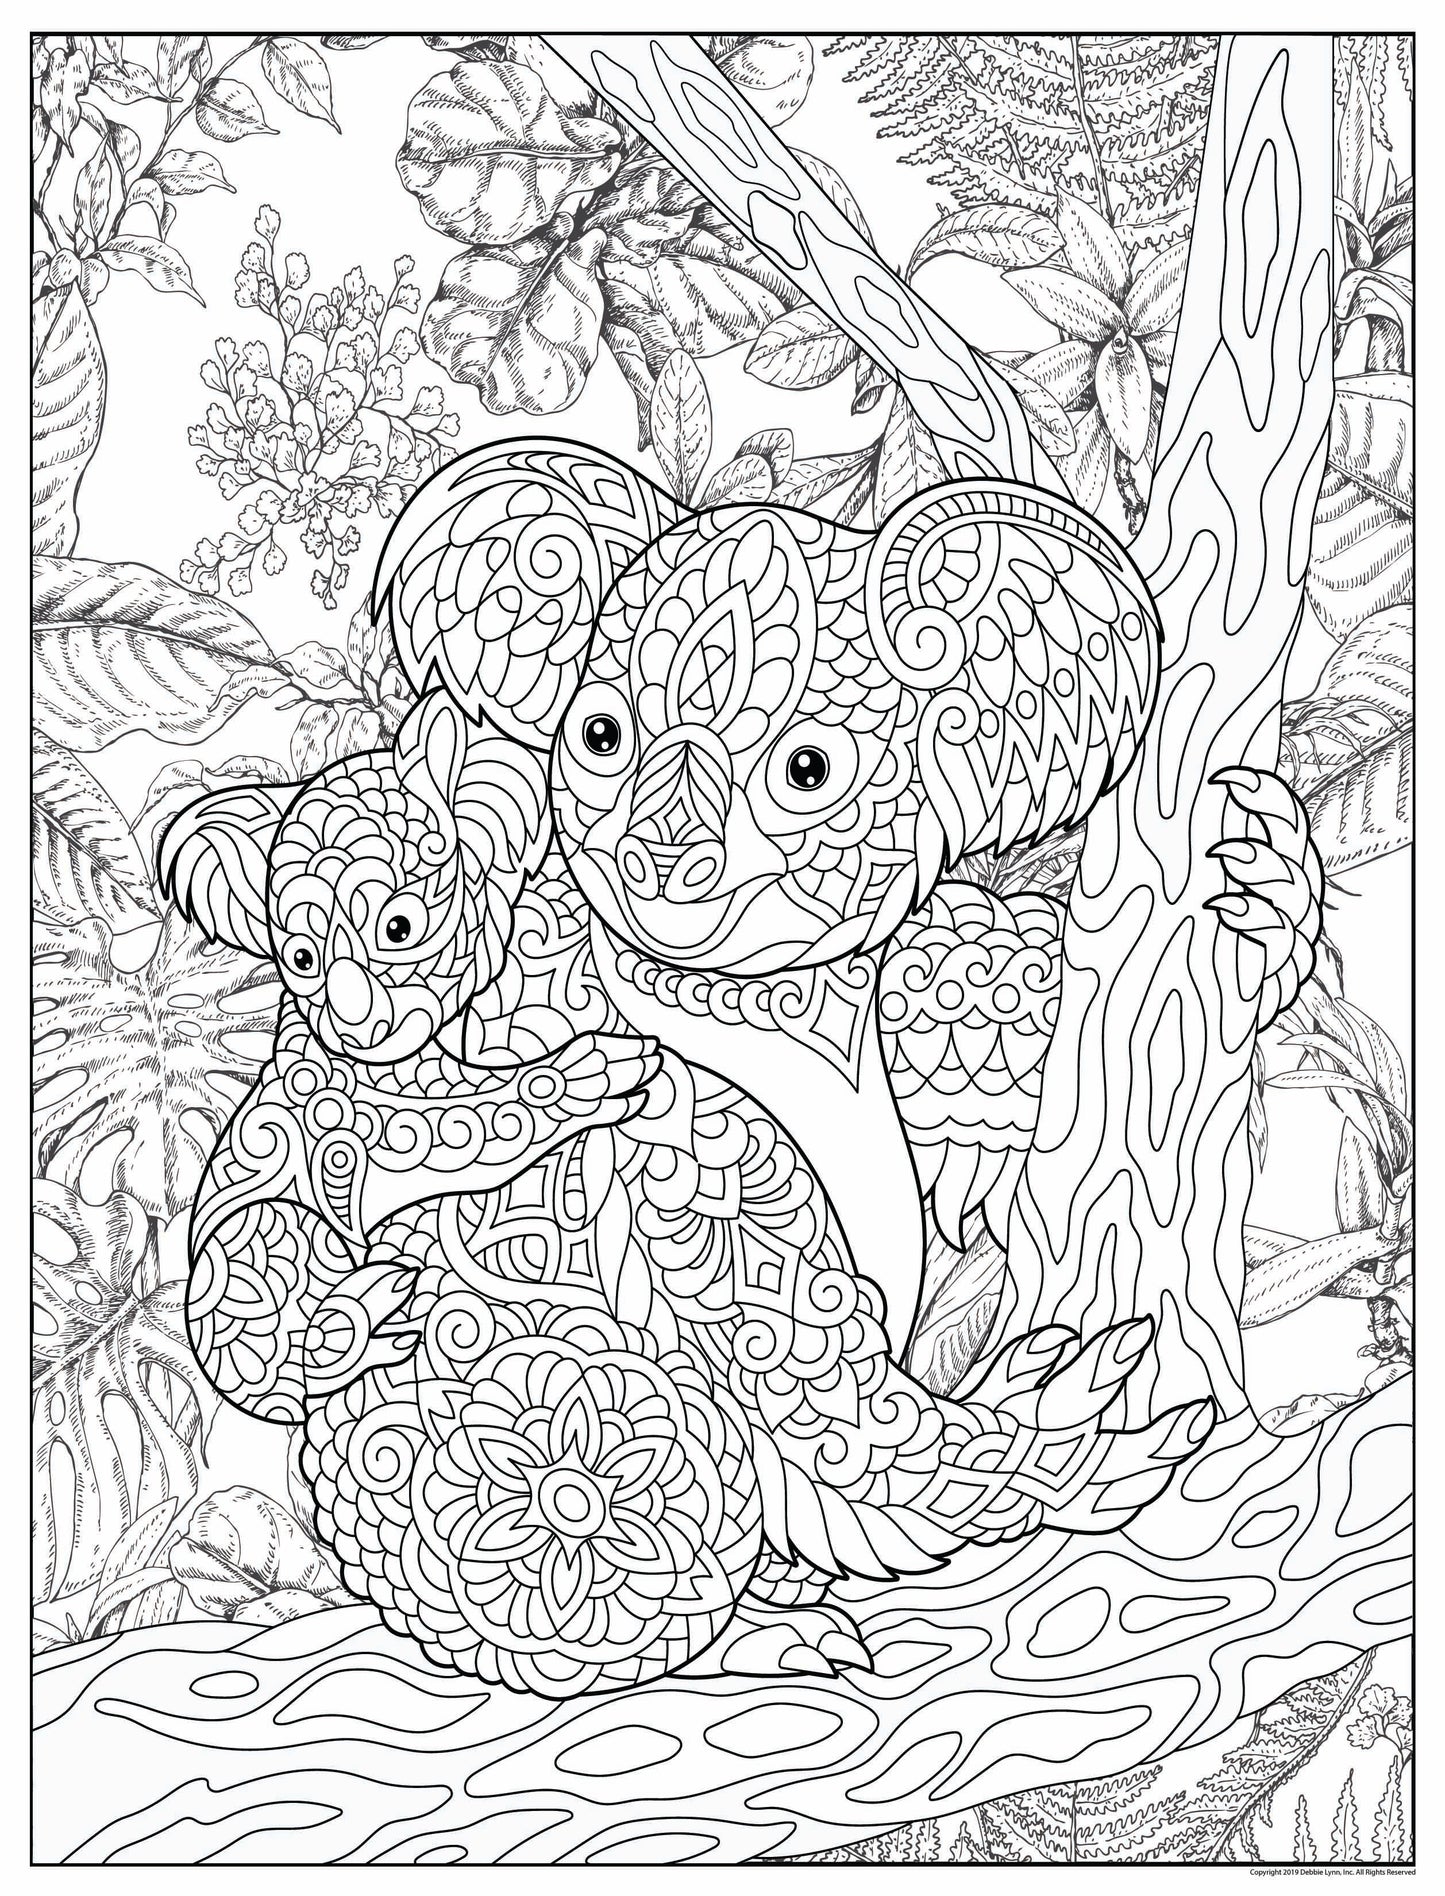 Koala Personalized Giant Coloring Poster 46"x60"